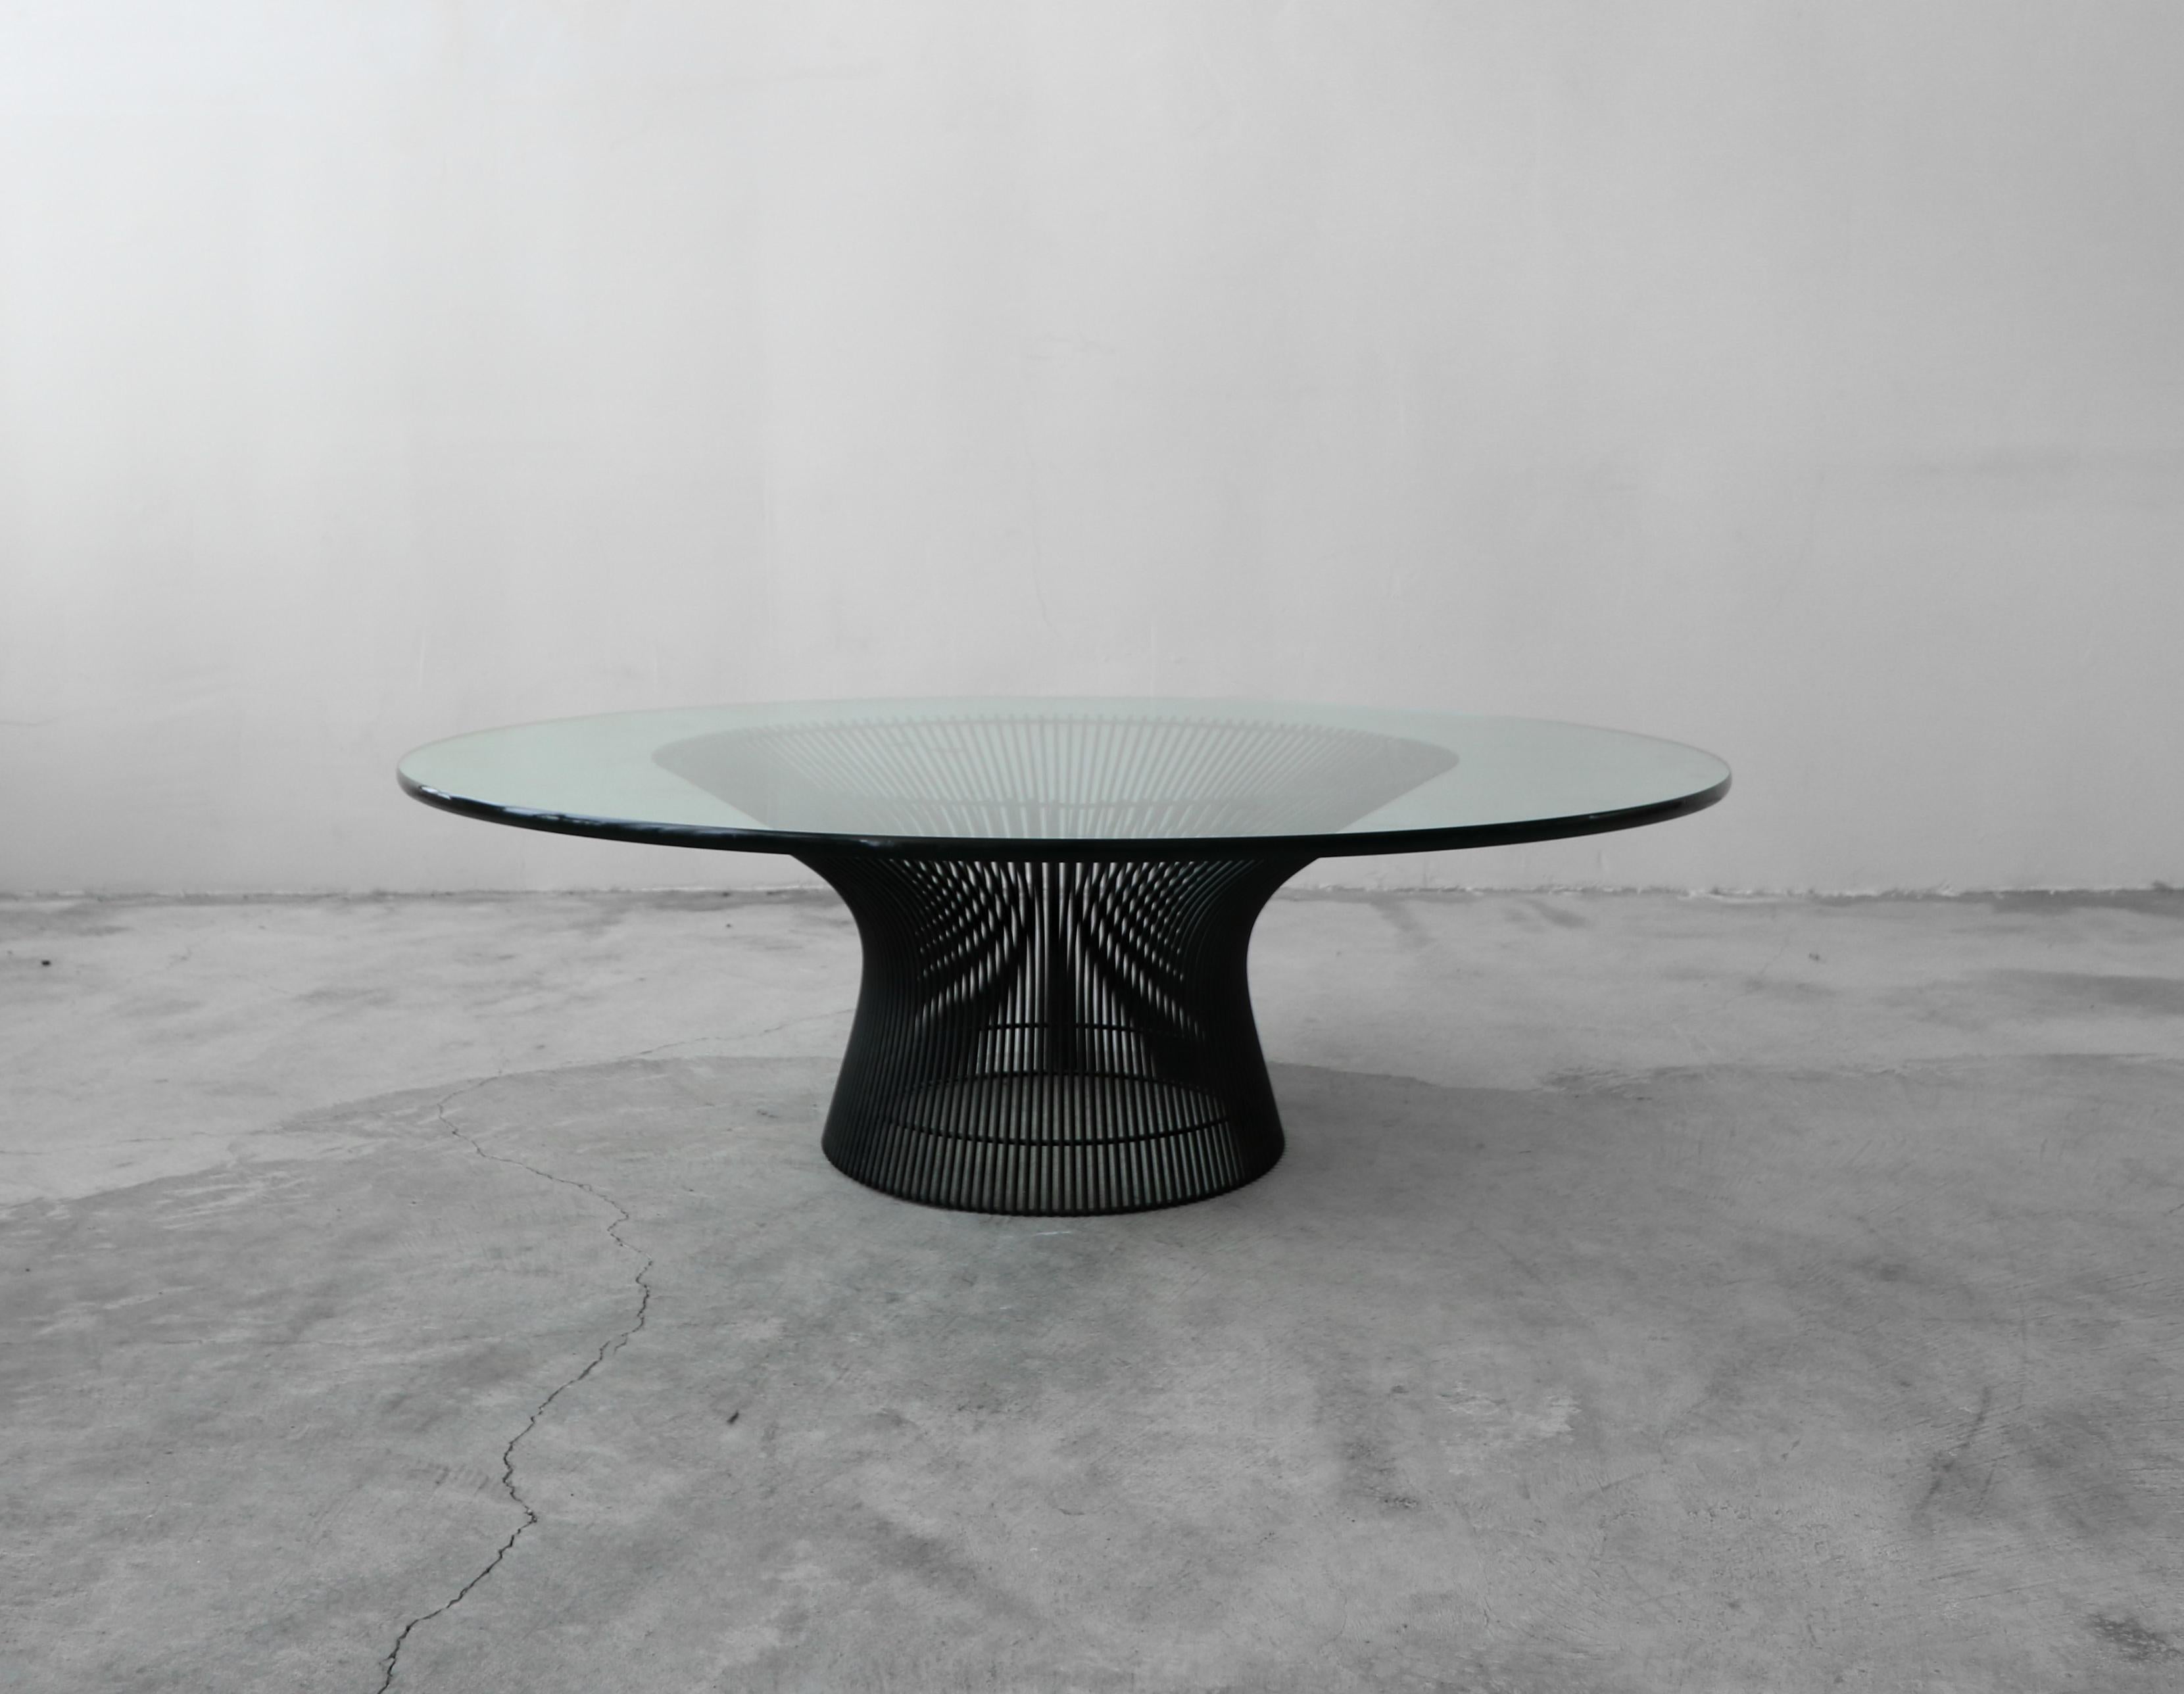 Authentic midcentury wire and glass coffee table by Warren Platner for Knoll. The table is the original RARE black and in excellent condition showing no rust or patina.

Purchased from the original owner, a predominantly Knoll collection.

Base